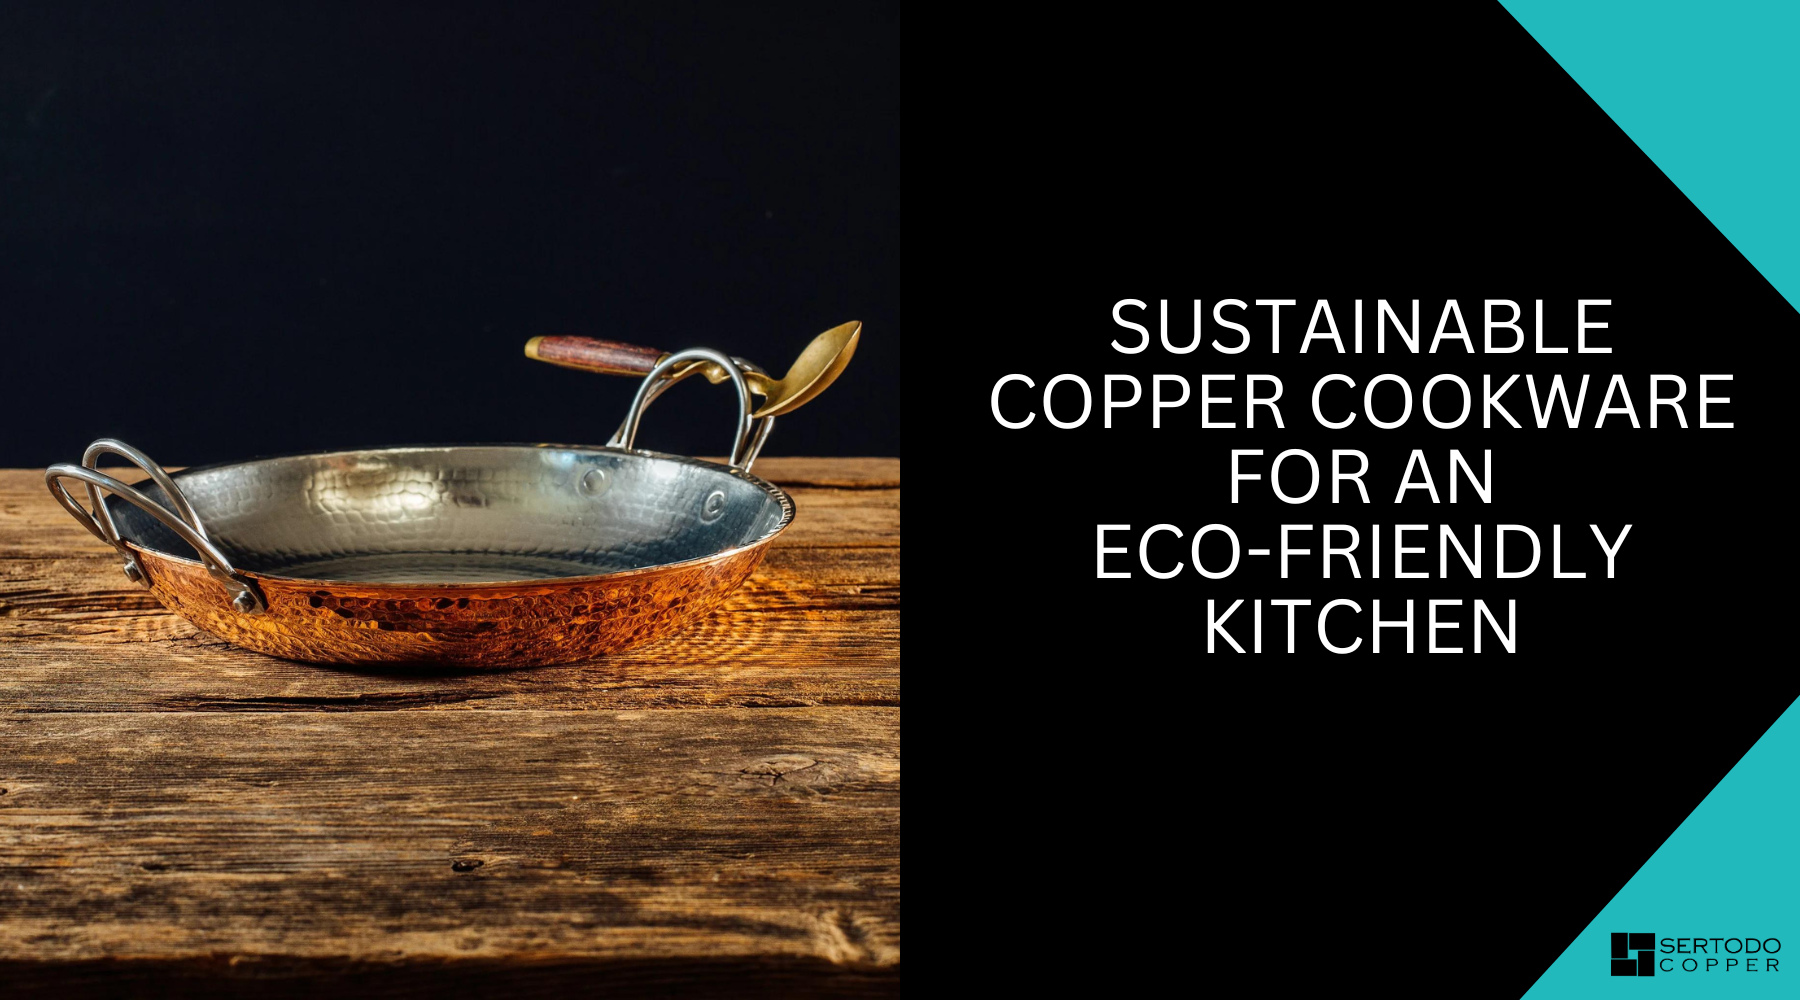 Sustainable Copper Cookware Guide